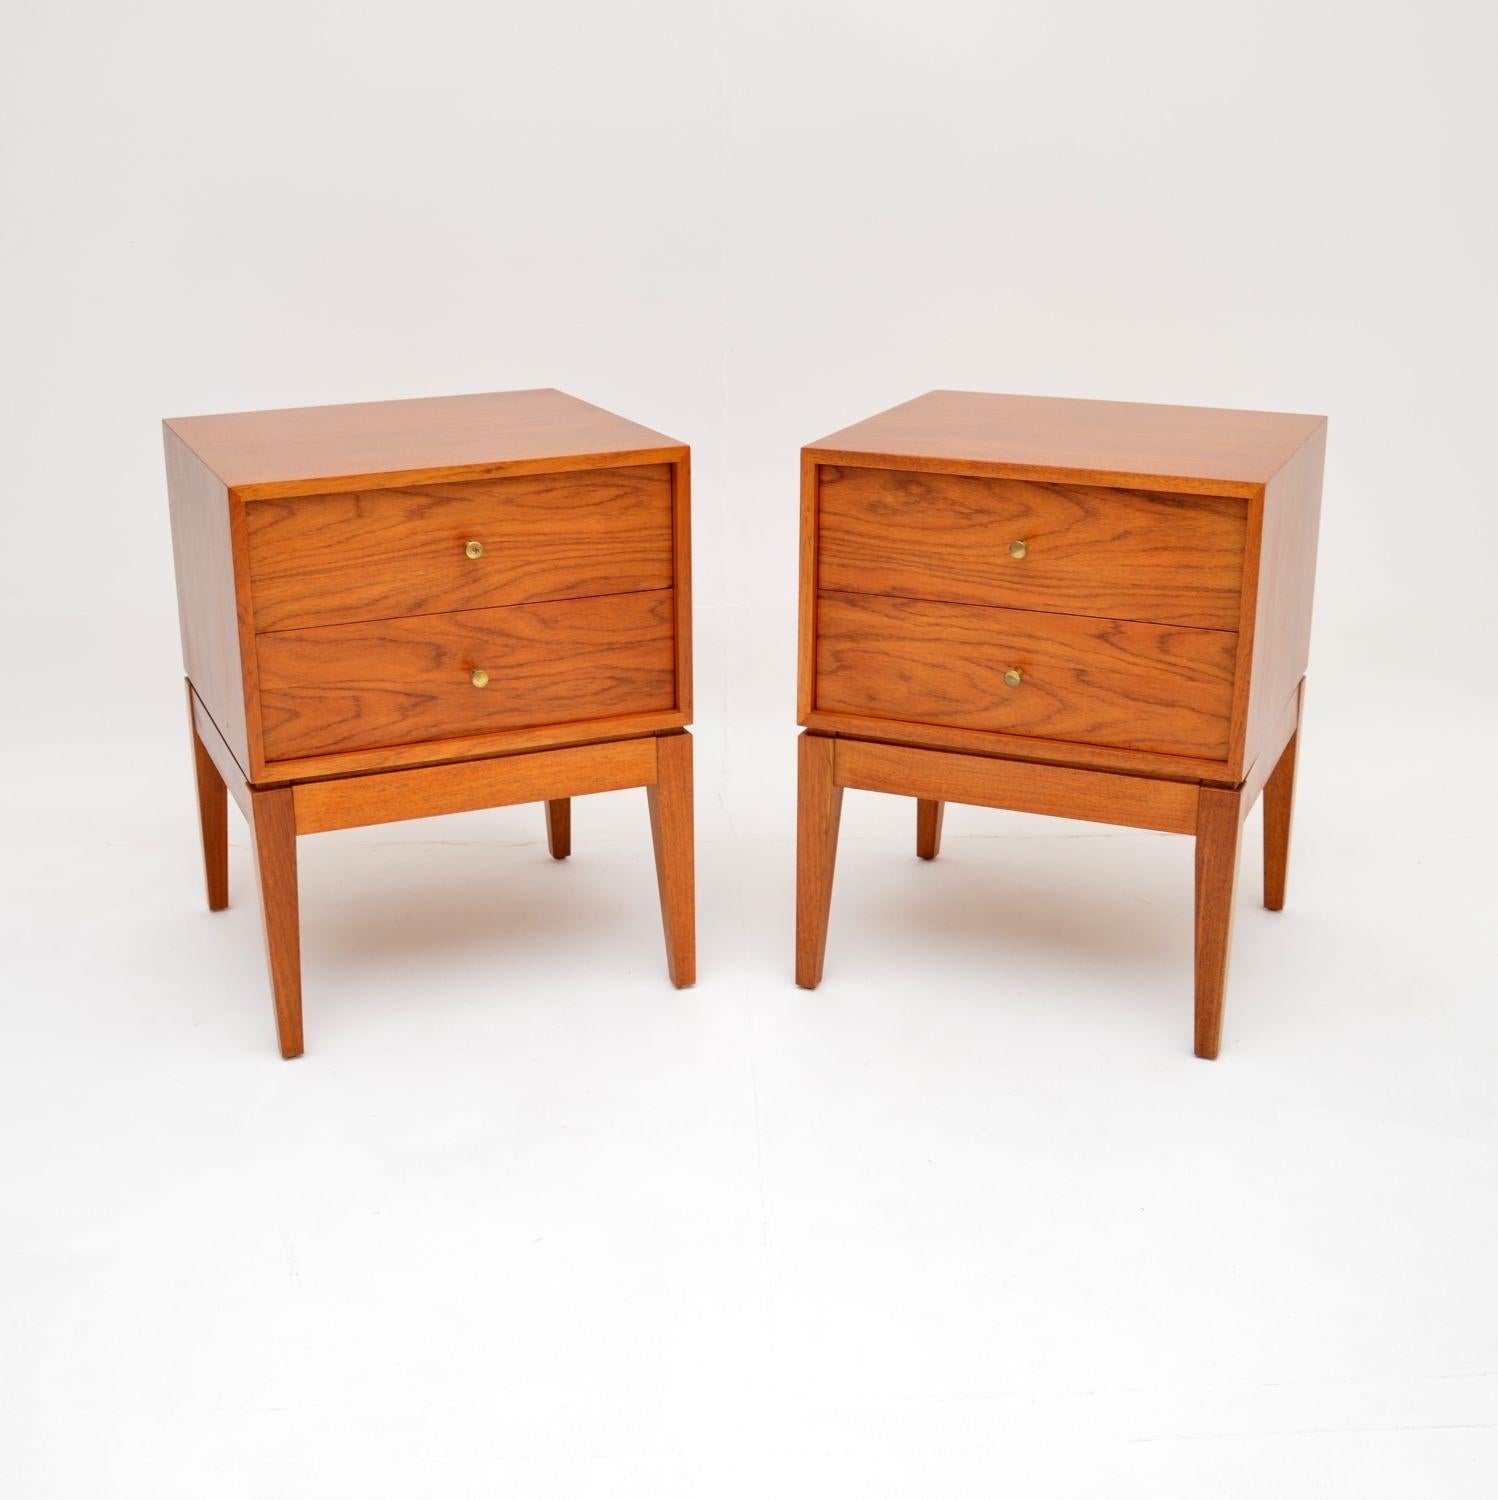 A superb pair of vintage bedside chests, made by Uniflex in England, and dating from the 1960’s.
The drawers here appear to be possibly teak. The drawers do have striking grain patterns, they may also have another type of wood, it is hard to tell!